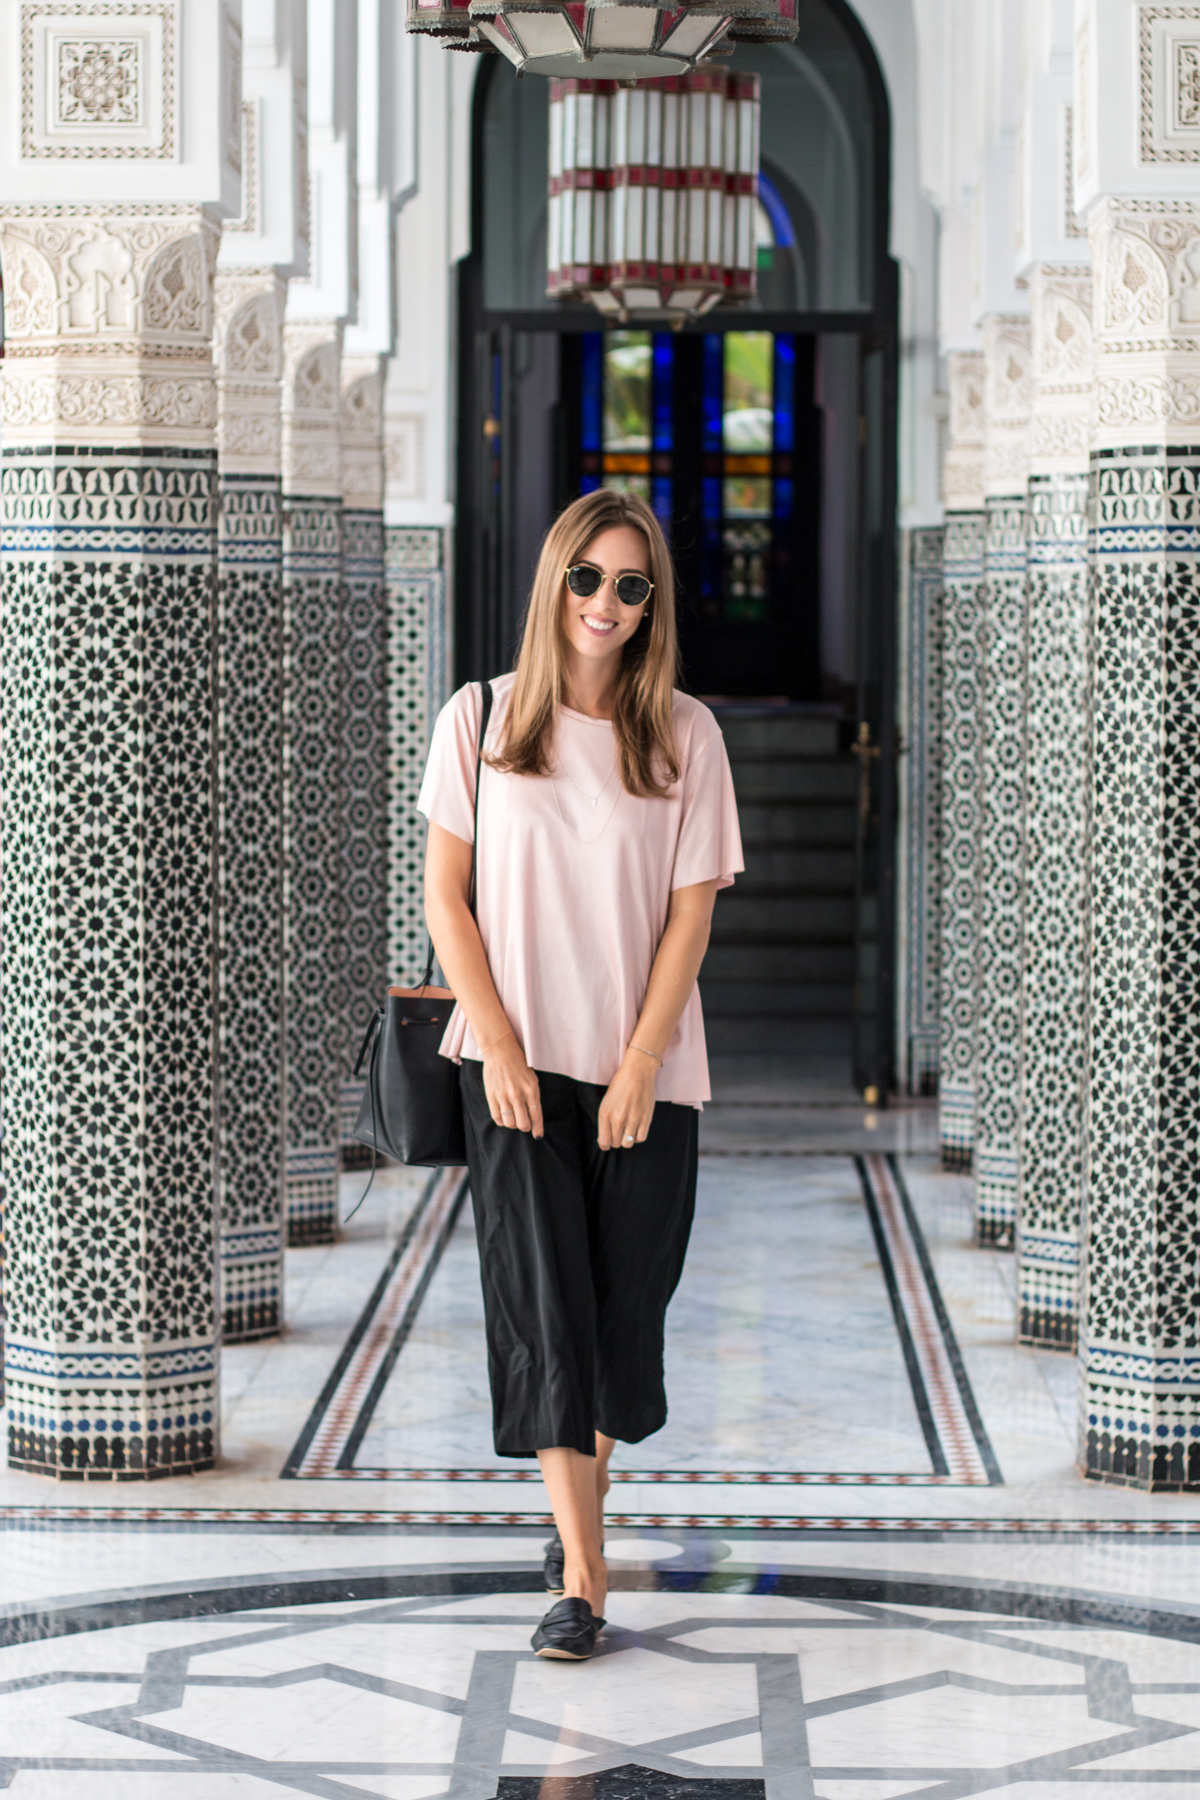 Marrakech Travel Diary | The Daily Dose